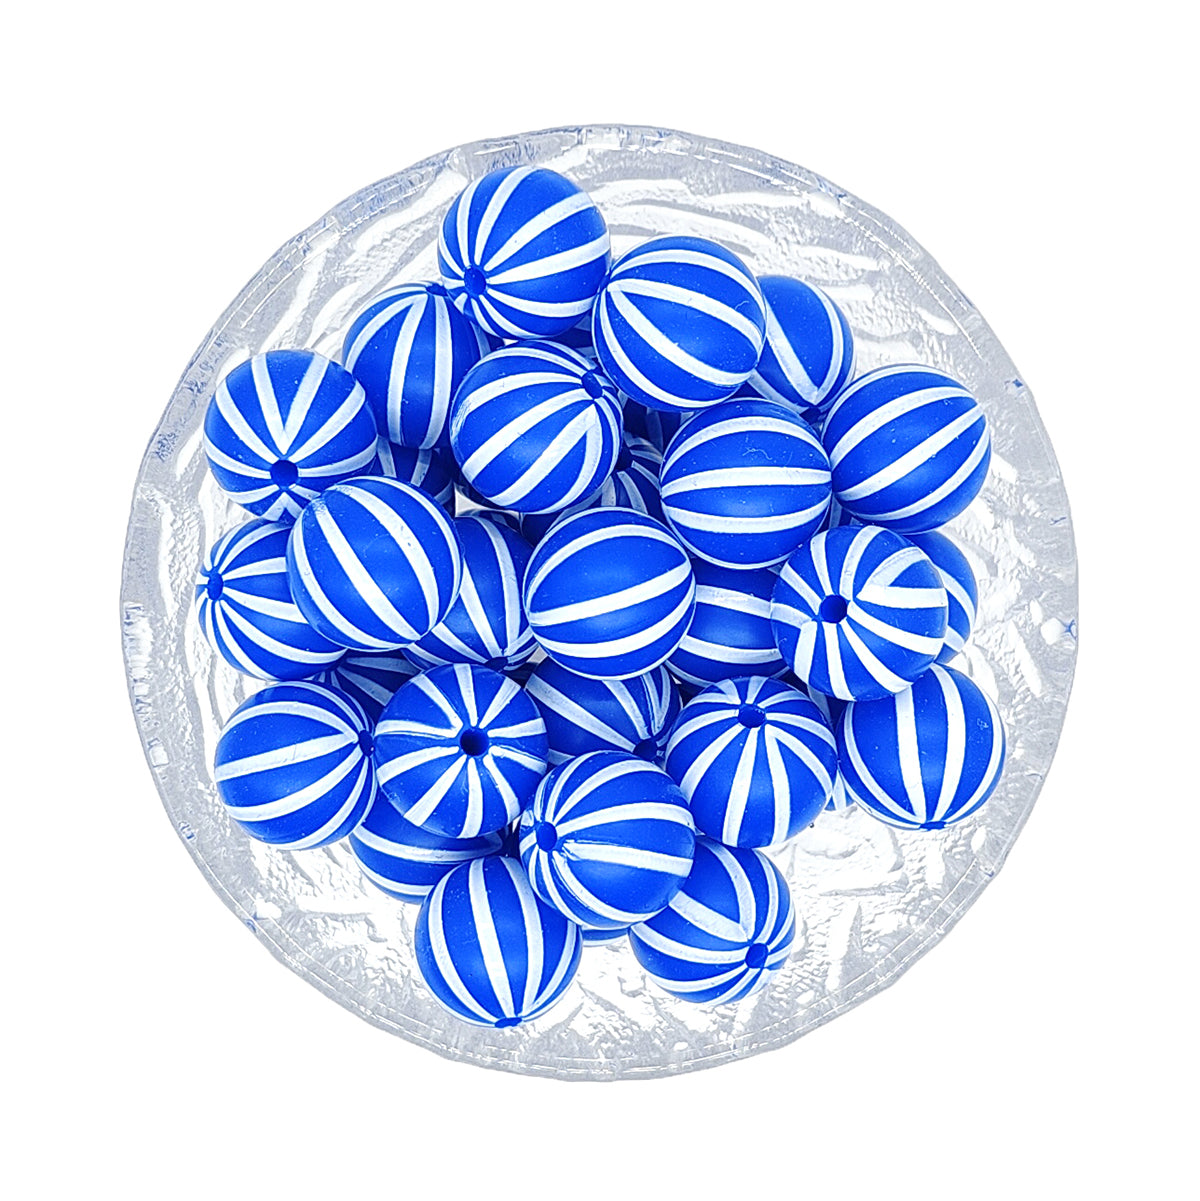 15mm Round Balloon Print Silicone Beads